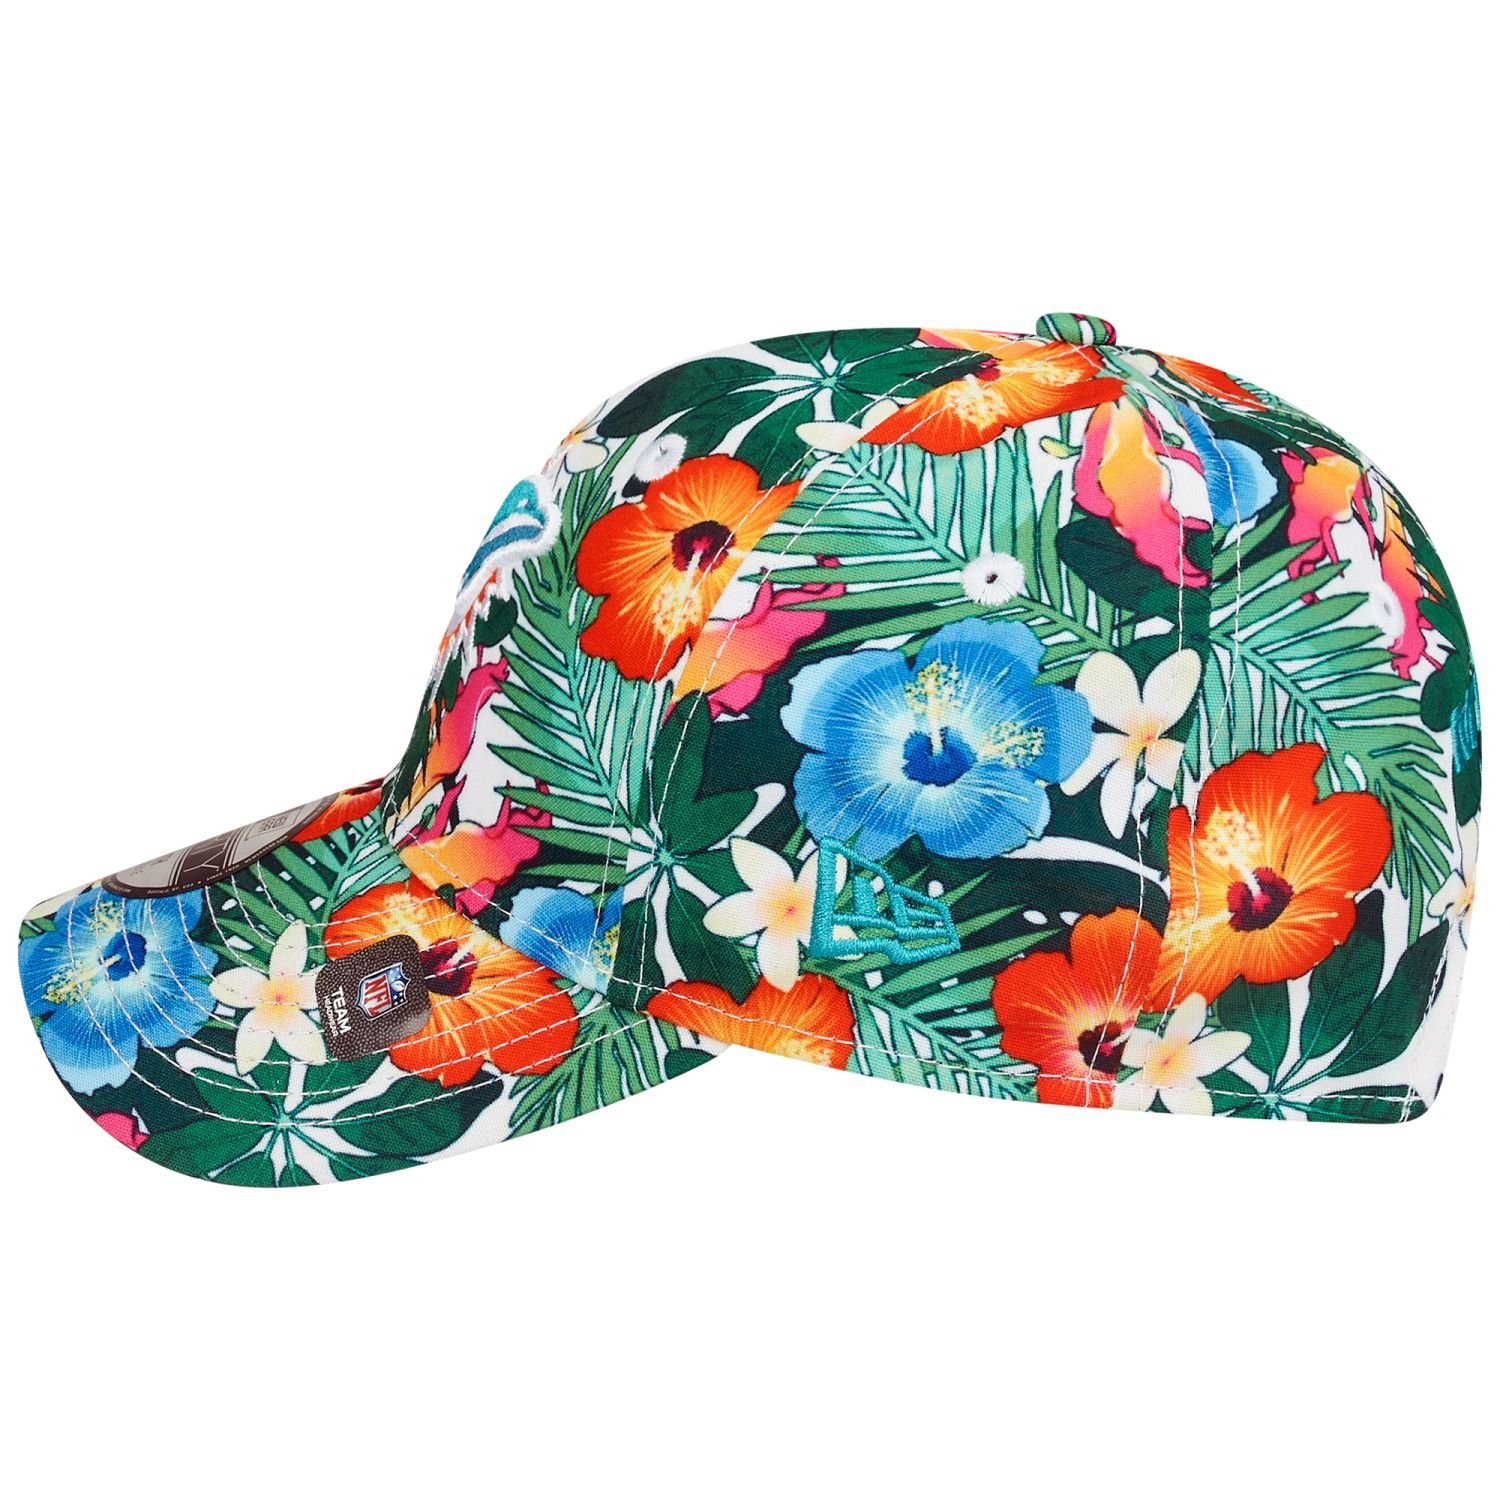 New Era Baseball Cap NFL 9Forty Dolphins Miami floral